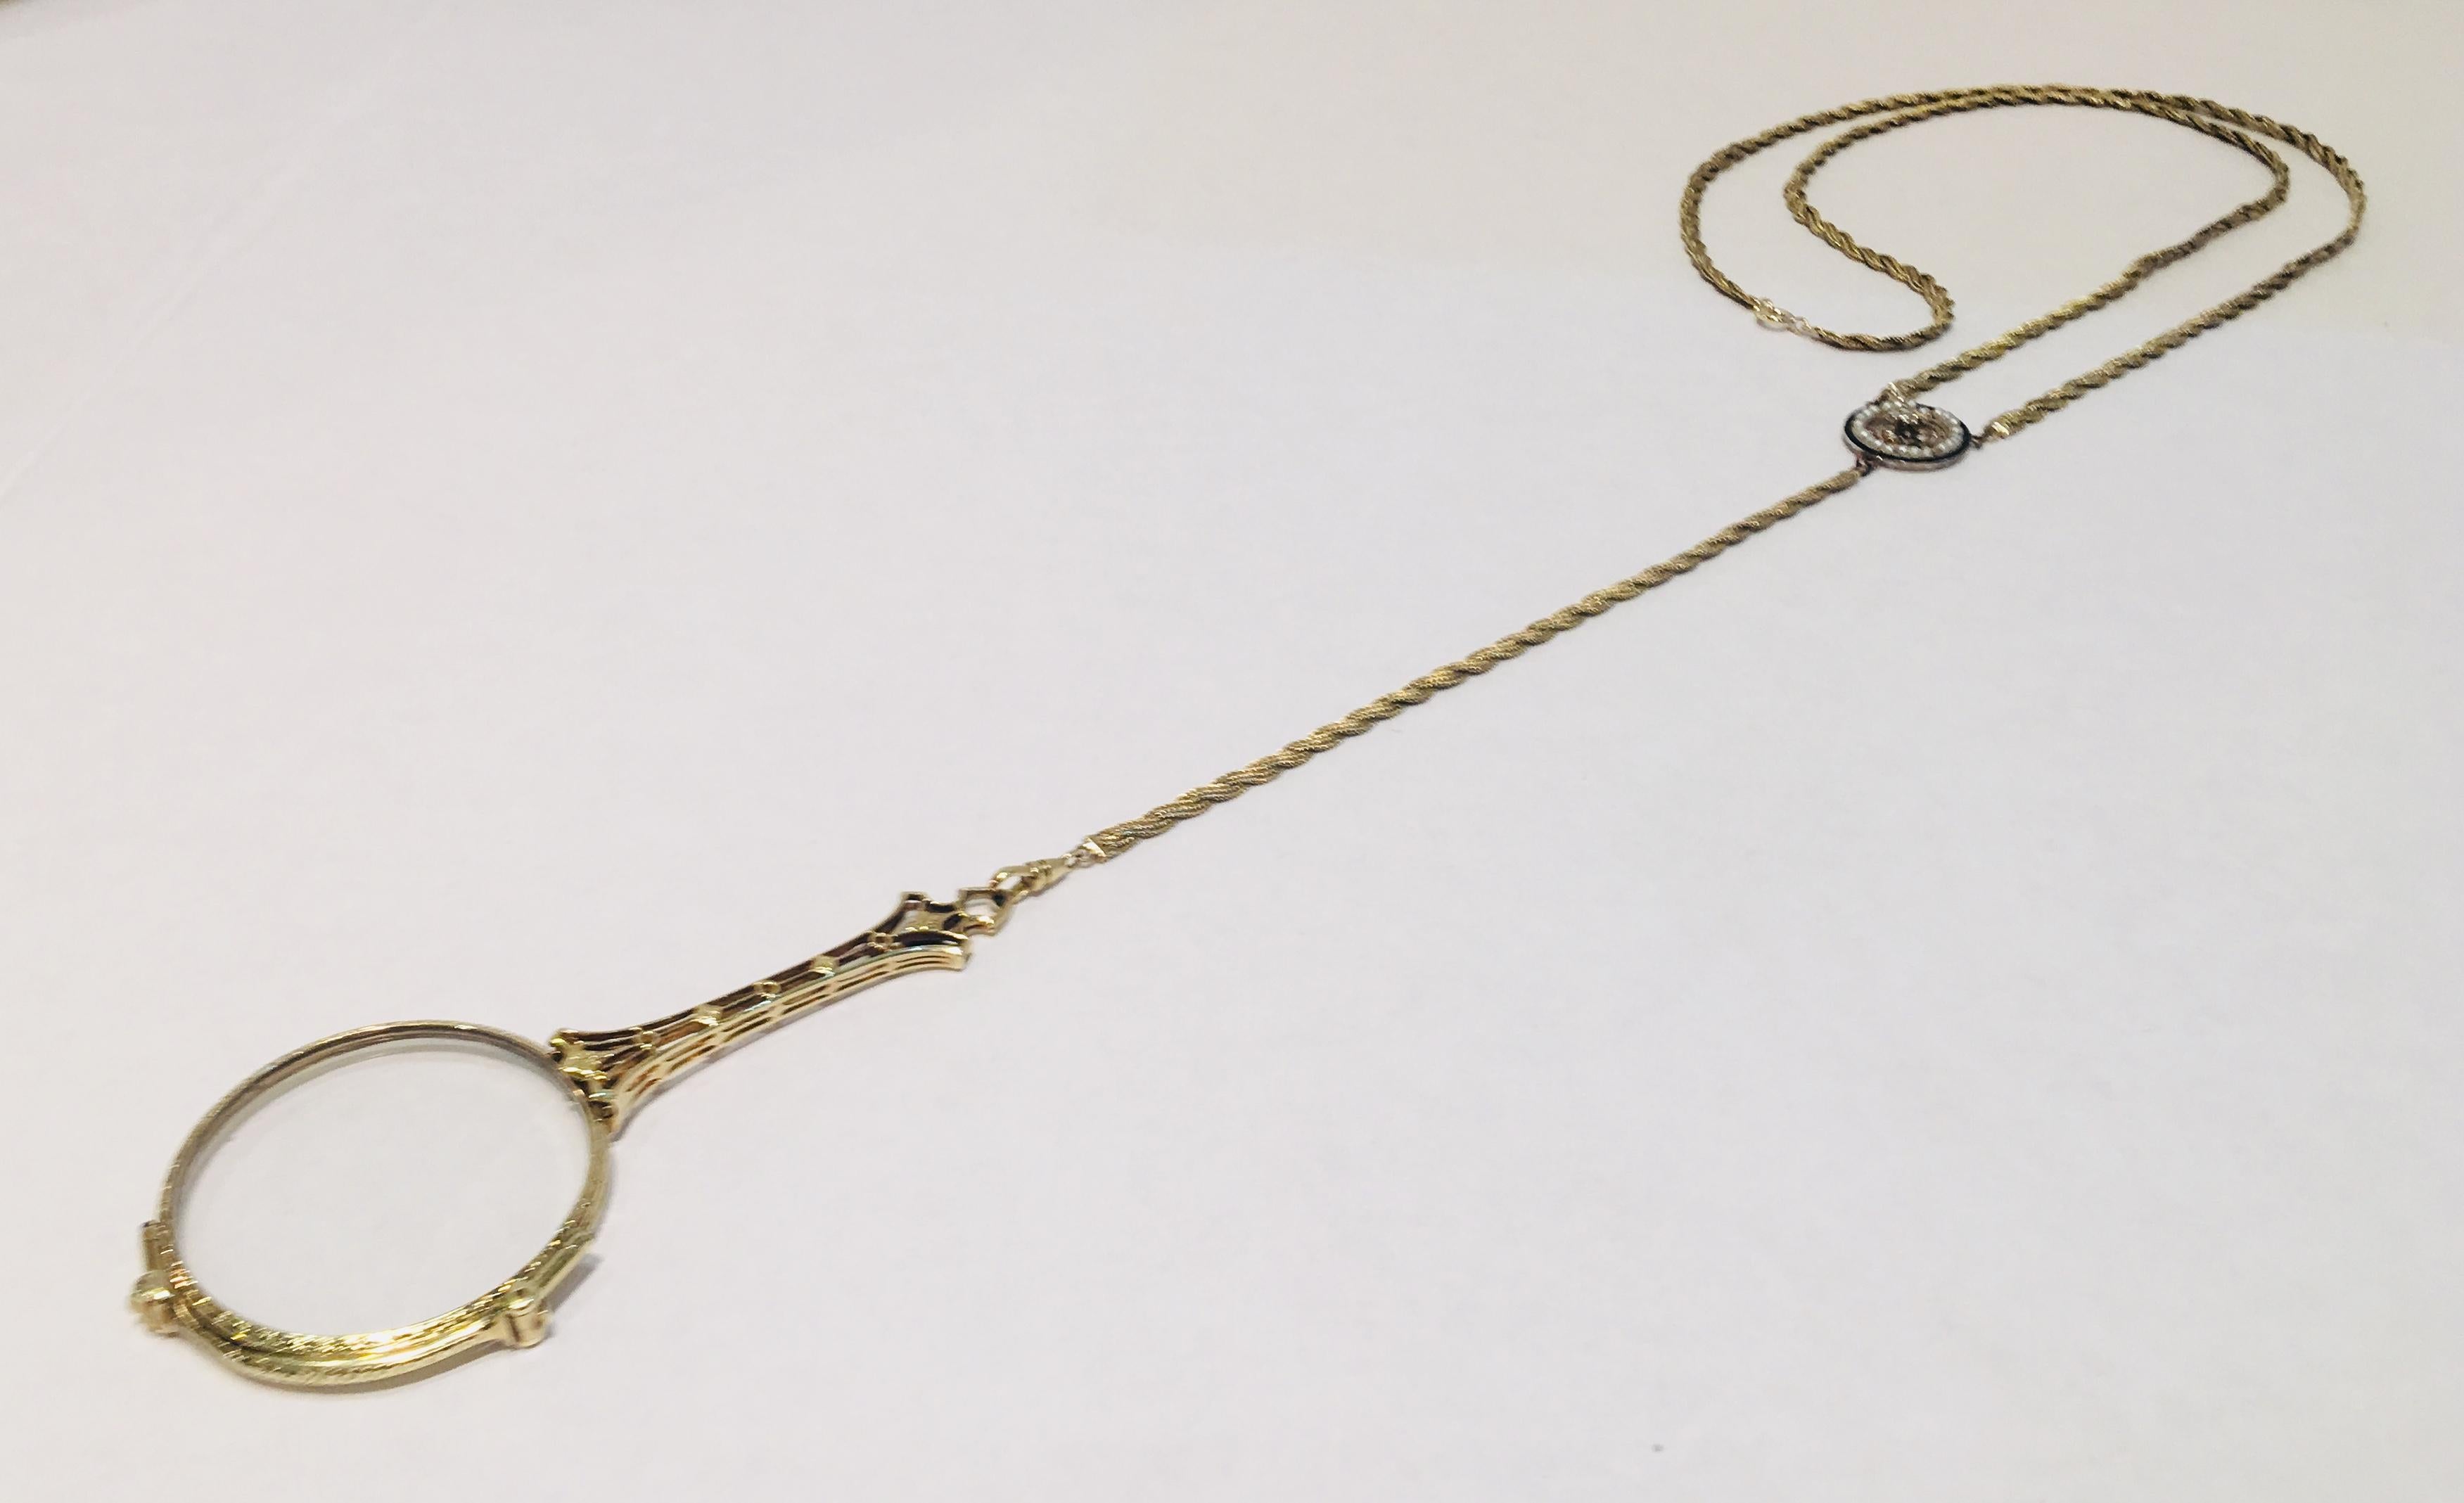 14 Karat Lorgnette Folding Eyeglasses with Gold, Diamond and Seed Pearls Lariat For Sale 4